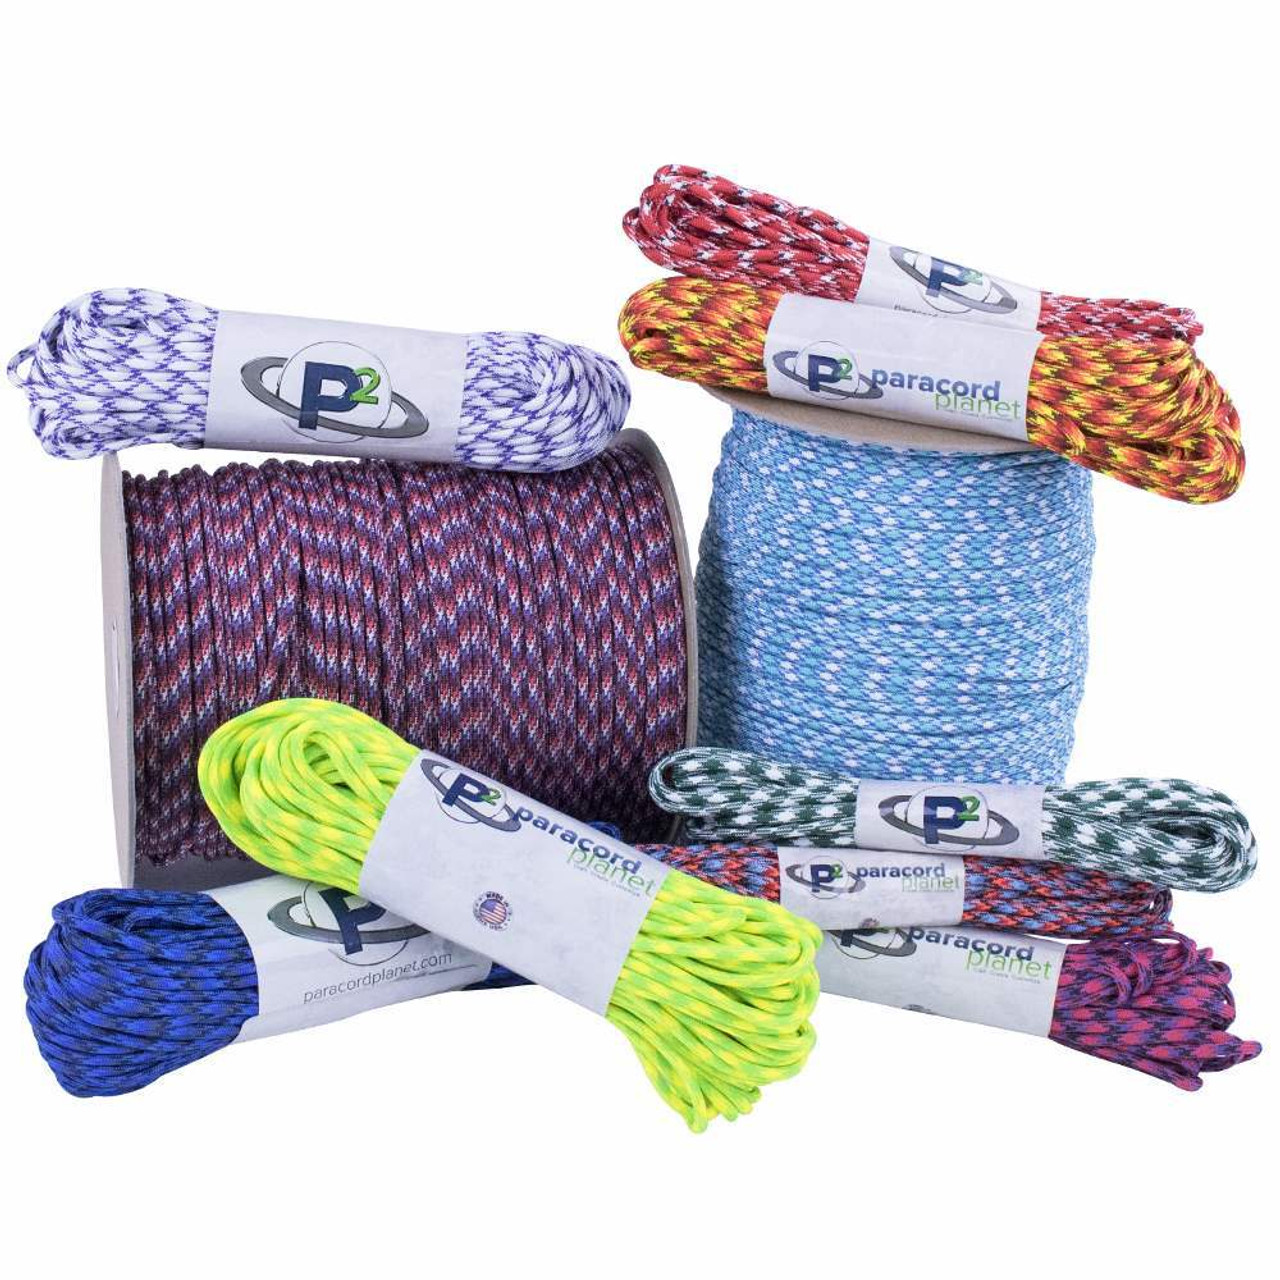 Paracord Planet 95 Paracord Made in the USA Paracord Bracelet Making Cord  Crafting and Indoor/outdoor Use Multiple Colors 